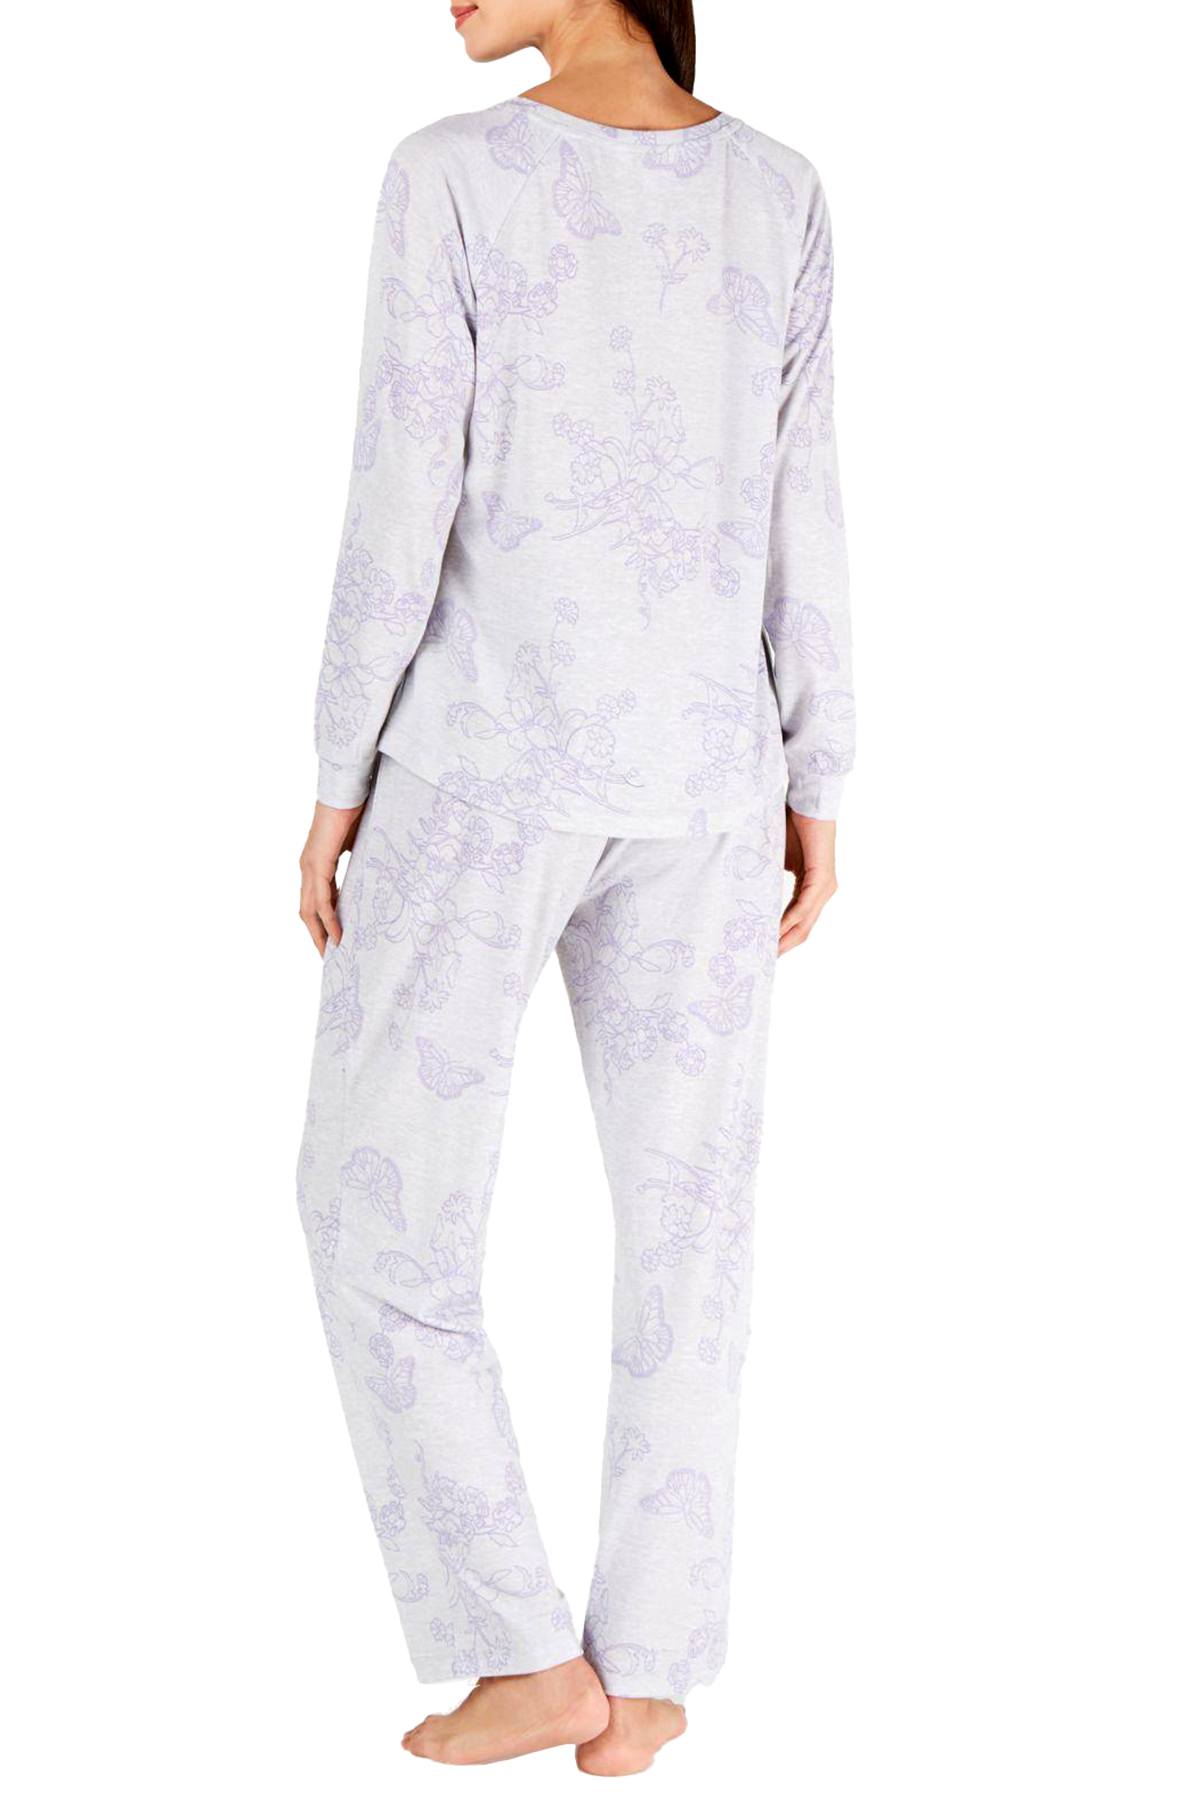 Charter Club Intimates Super Soft Knit Pajama Set in Fluttering Butterfly Print